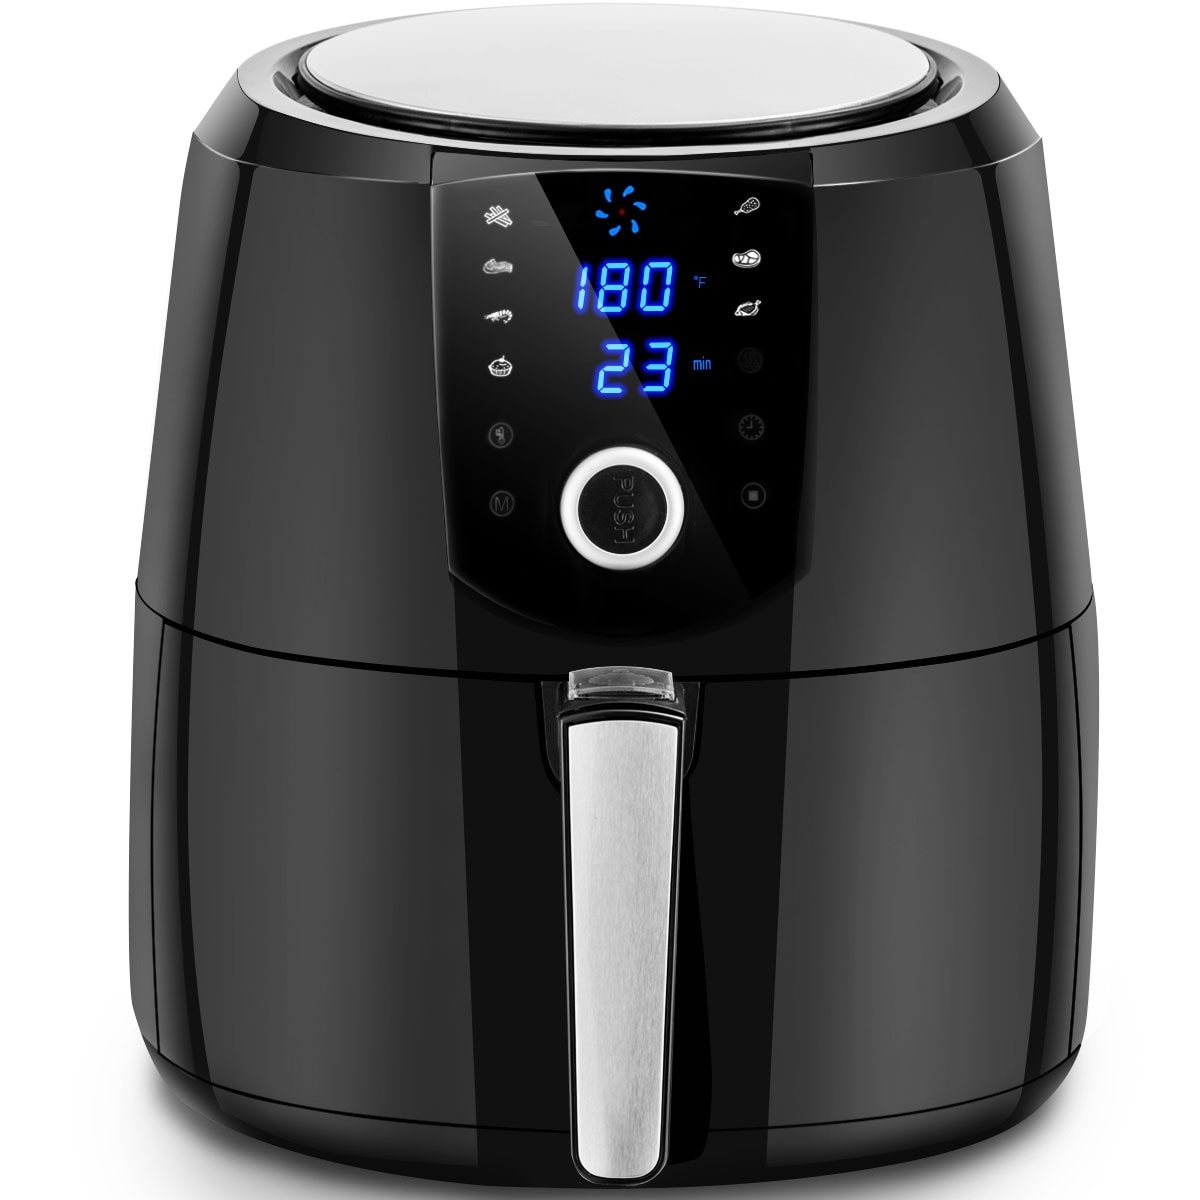 TILUXURY Digital Touch Screen Air Fryer 1400W (Large 5L Oven